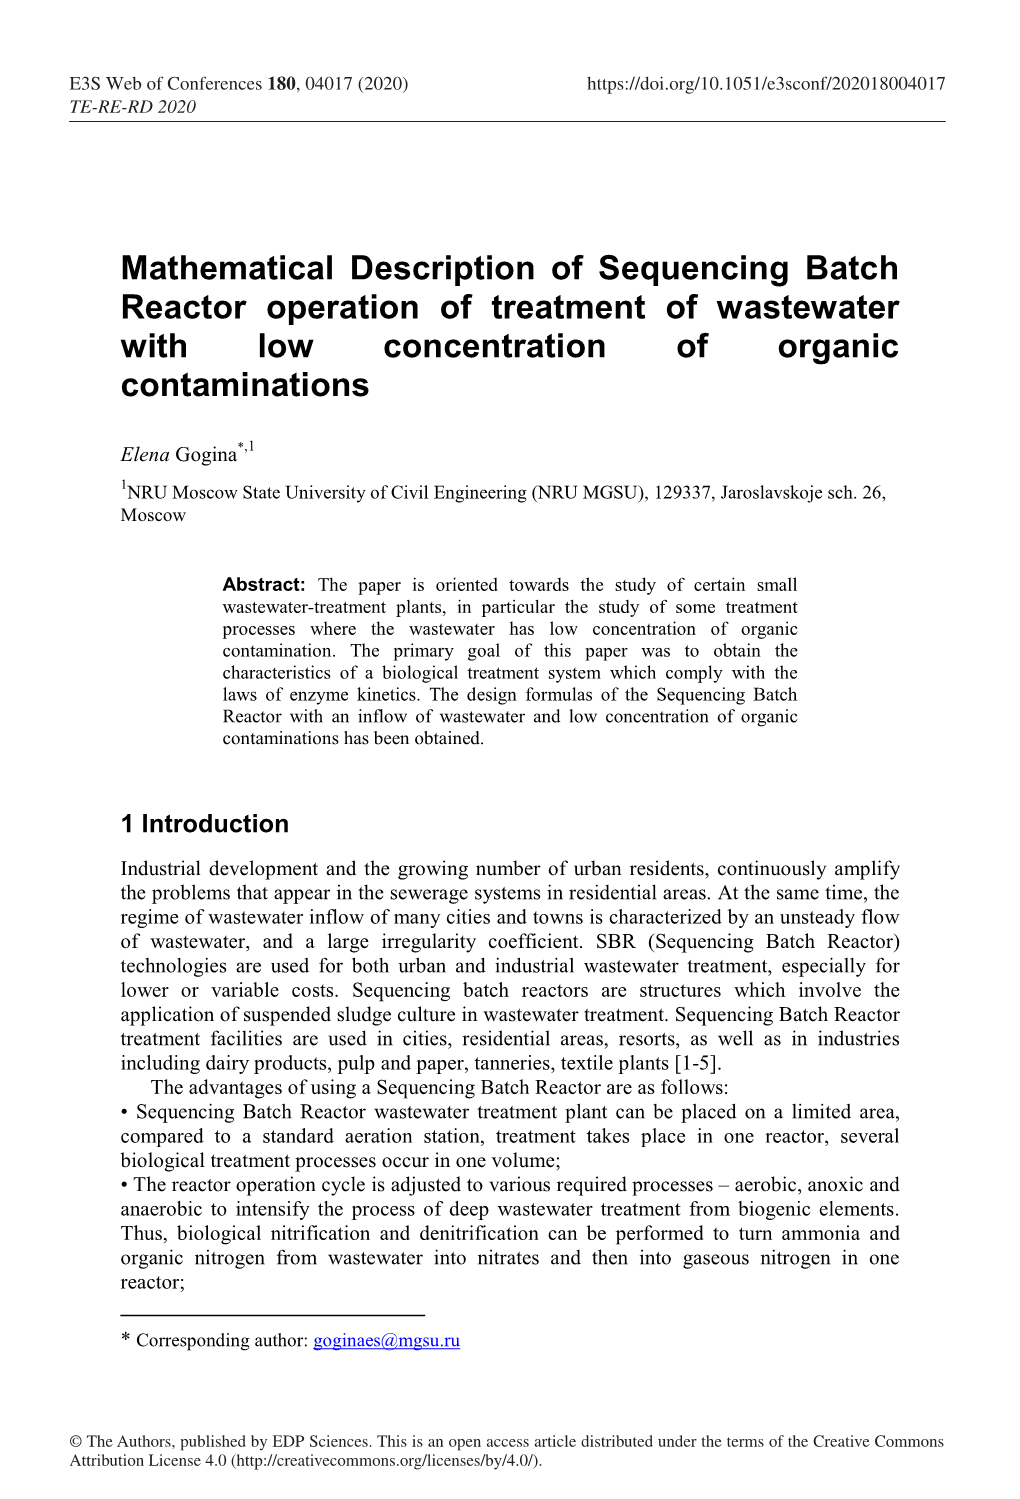 Mathematical Description of Sequencing Batch Reactor Operation of Treatment of Wastewater with Low Concentration of Organic Contaminations